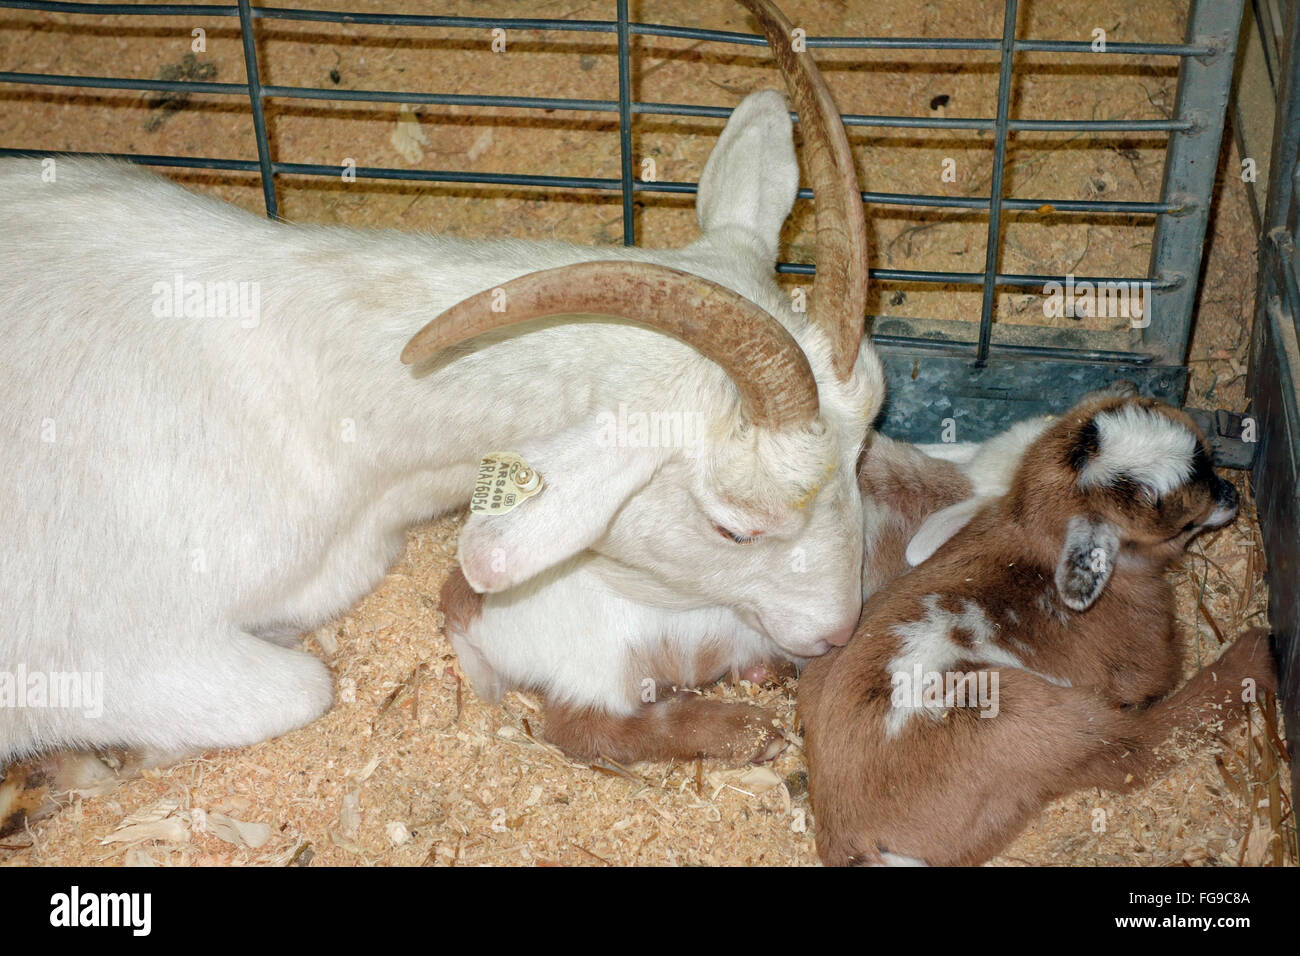 a domestic goat tending to two babies in a pen Stock Photo